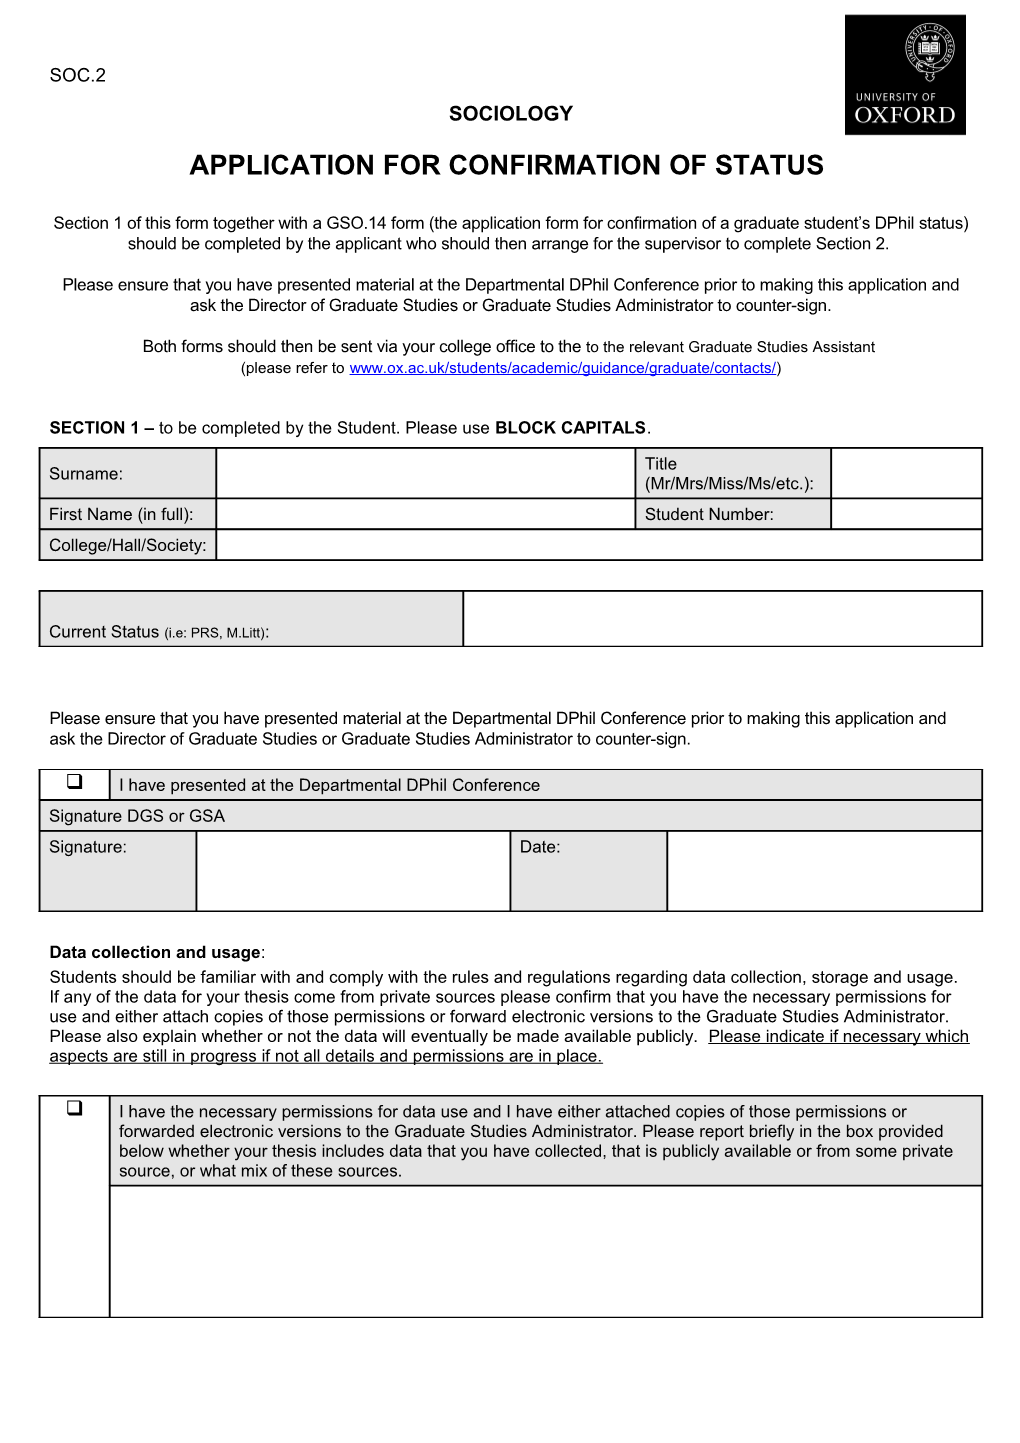 Application for Confirmation of Status